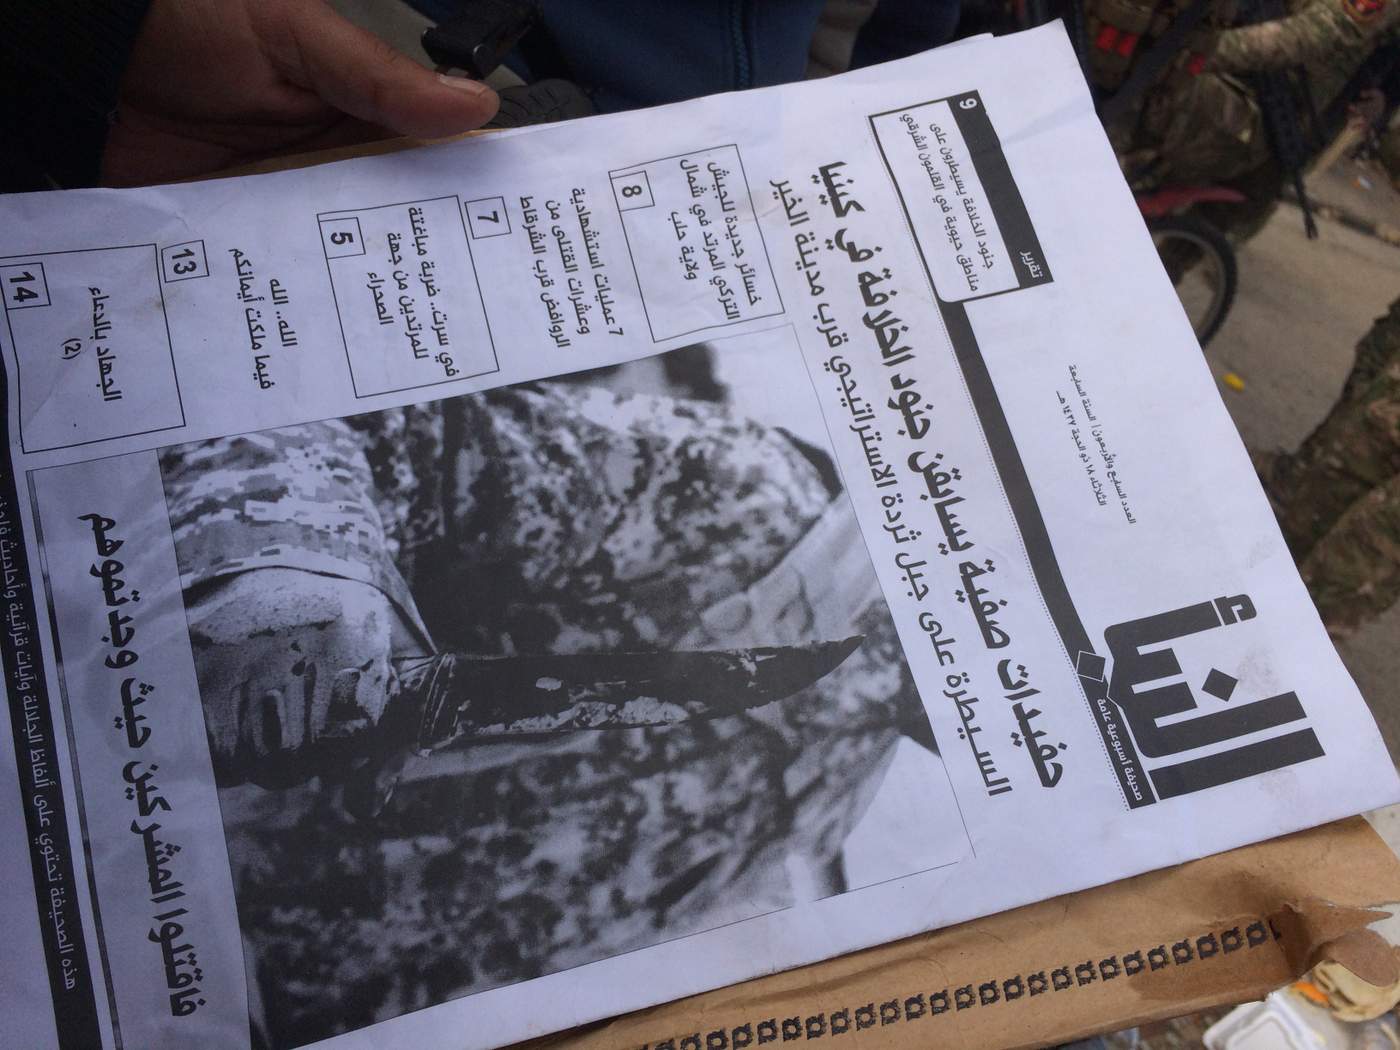 IS newspapers are left abandoned in houses and buildings. This paper, al-Nuba, has stories about IS activities in Africa and military propaganda spouting victories in Syria. (H. Murdock\/VOA) Jan. 13, 2017.